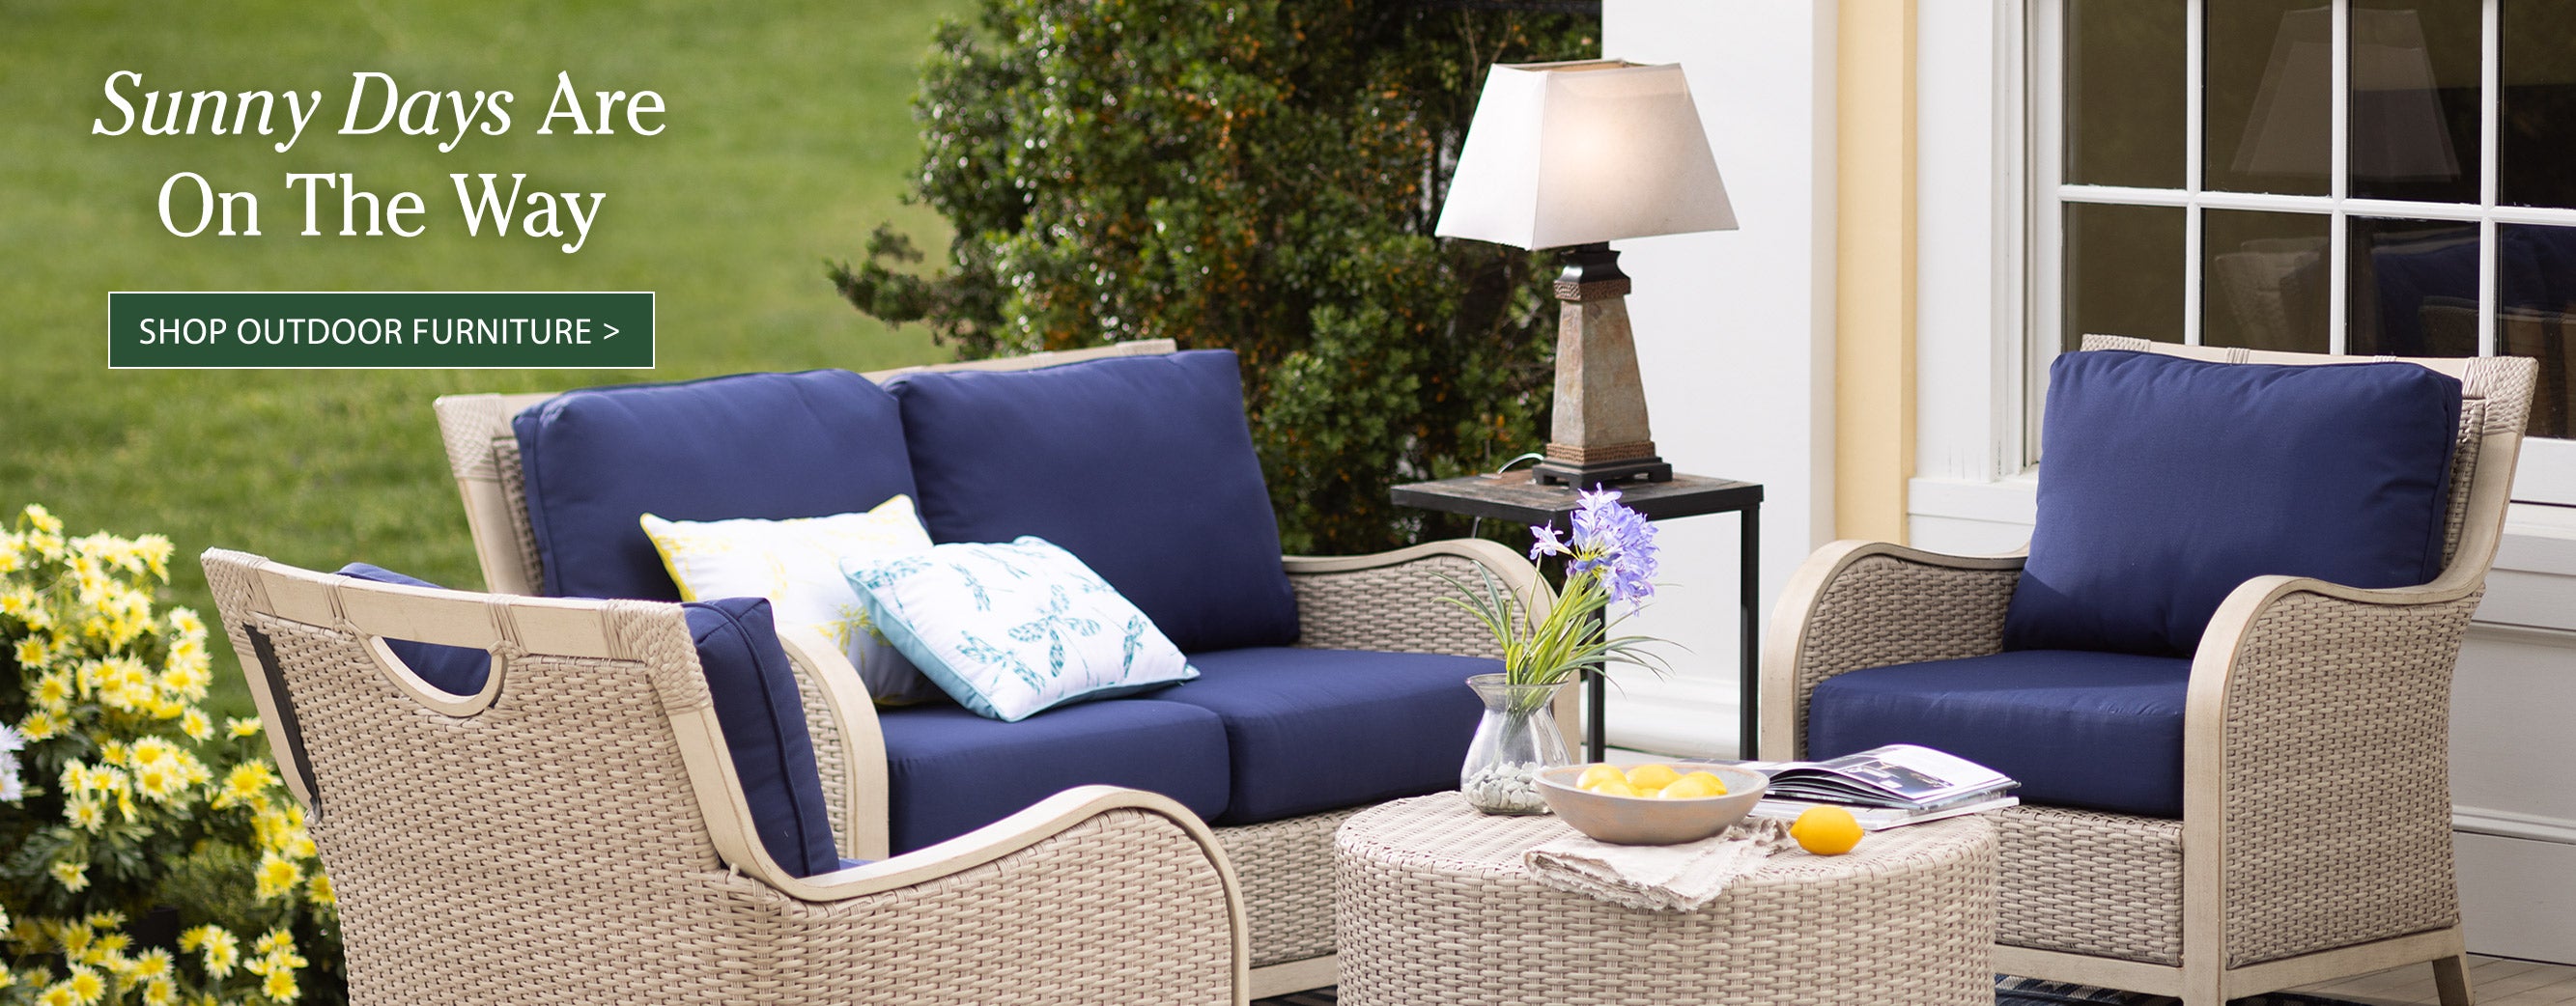 Image of Urbanna Premium Wicker Four Piece Set with Luxury Cushions. Sunny Days Are On The Way. SHOP OUTDOOR FURNITURE